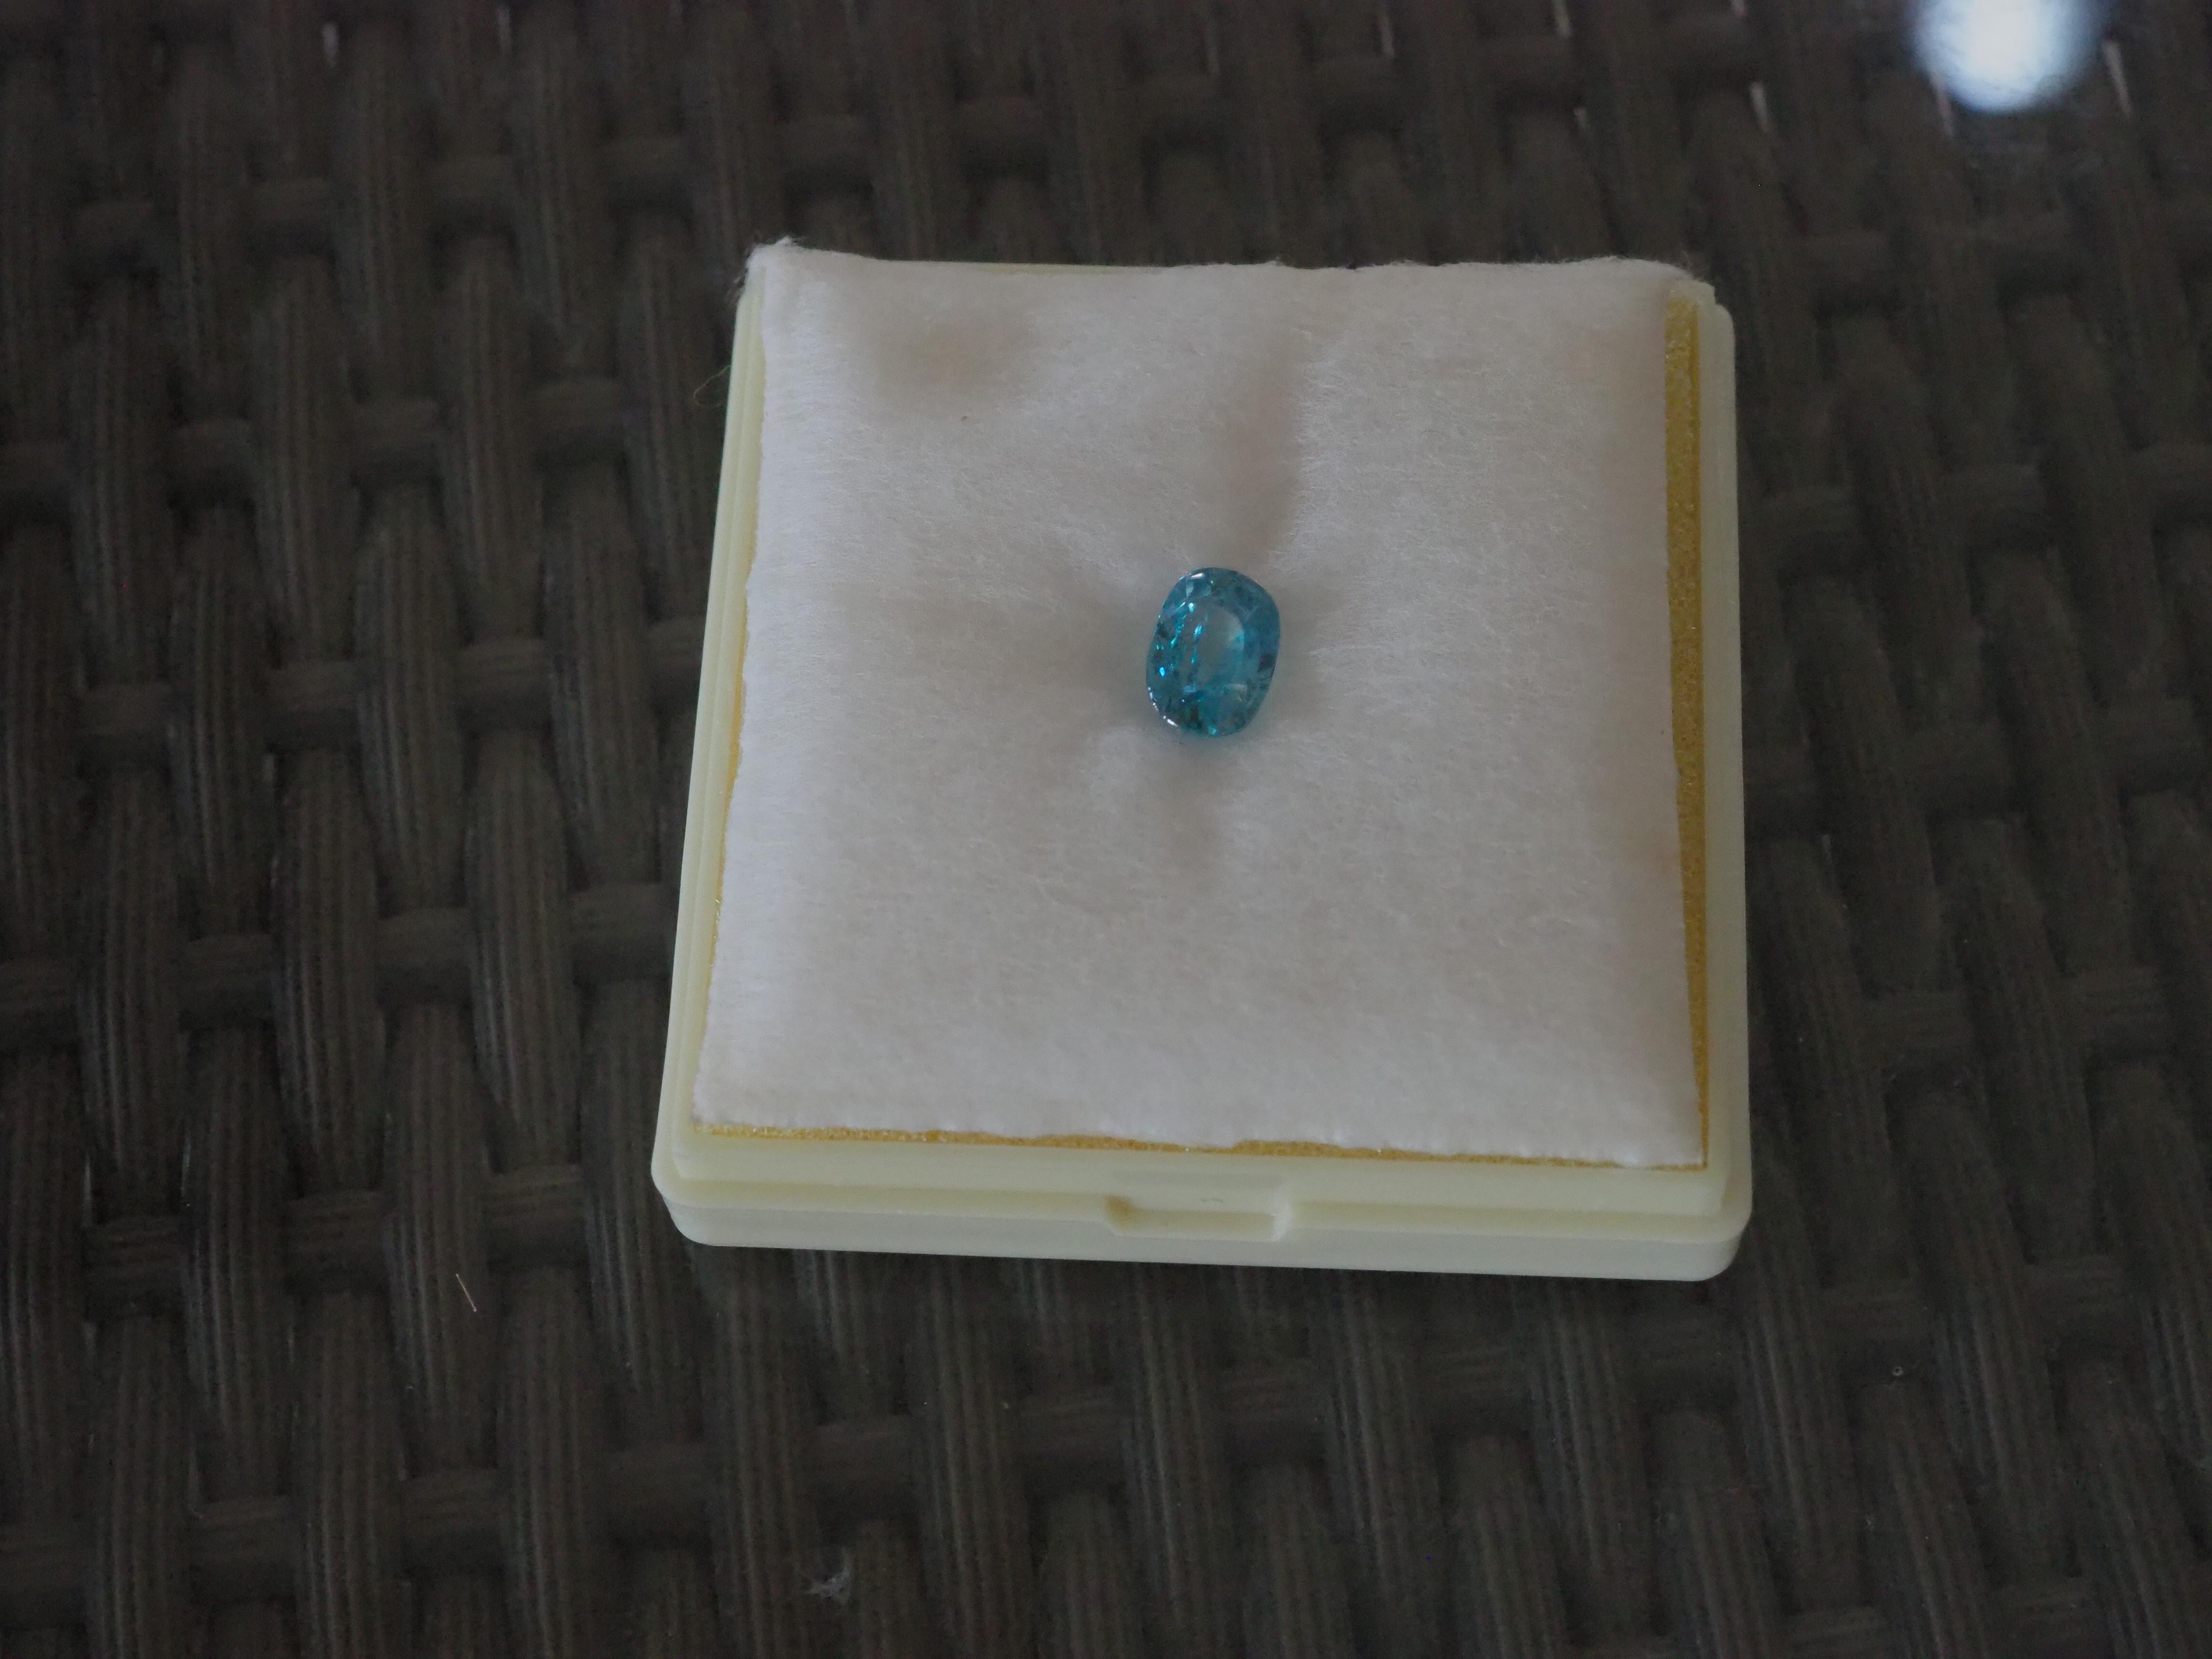 AIGS Certified 4.80ct Oval Blue Zircon, 10.27x7.09x5.89 mm For Sale 2